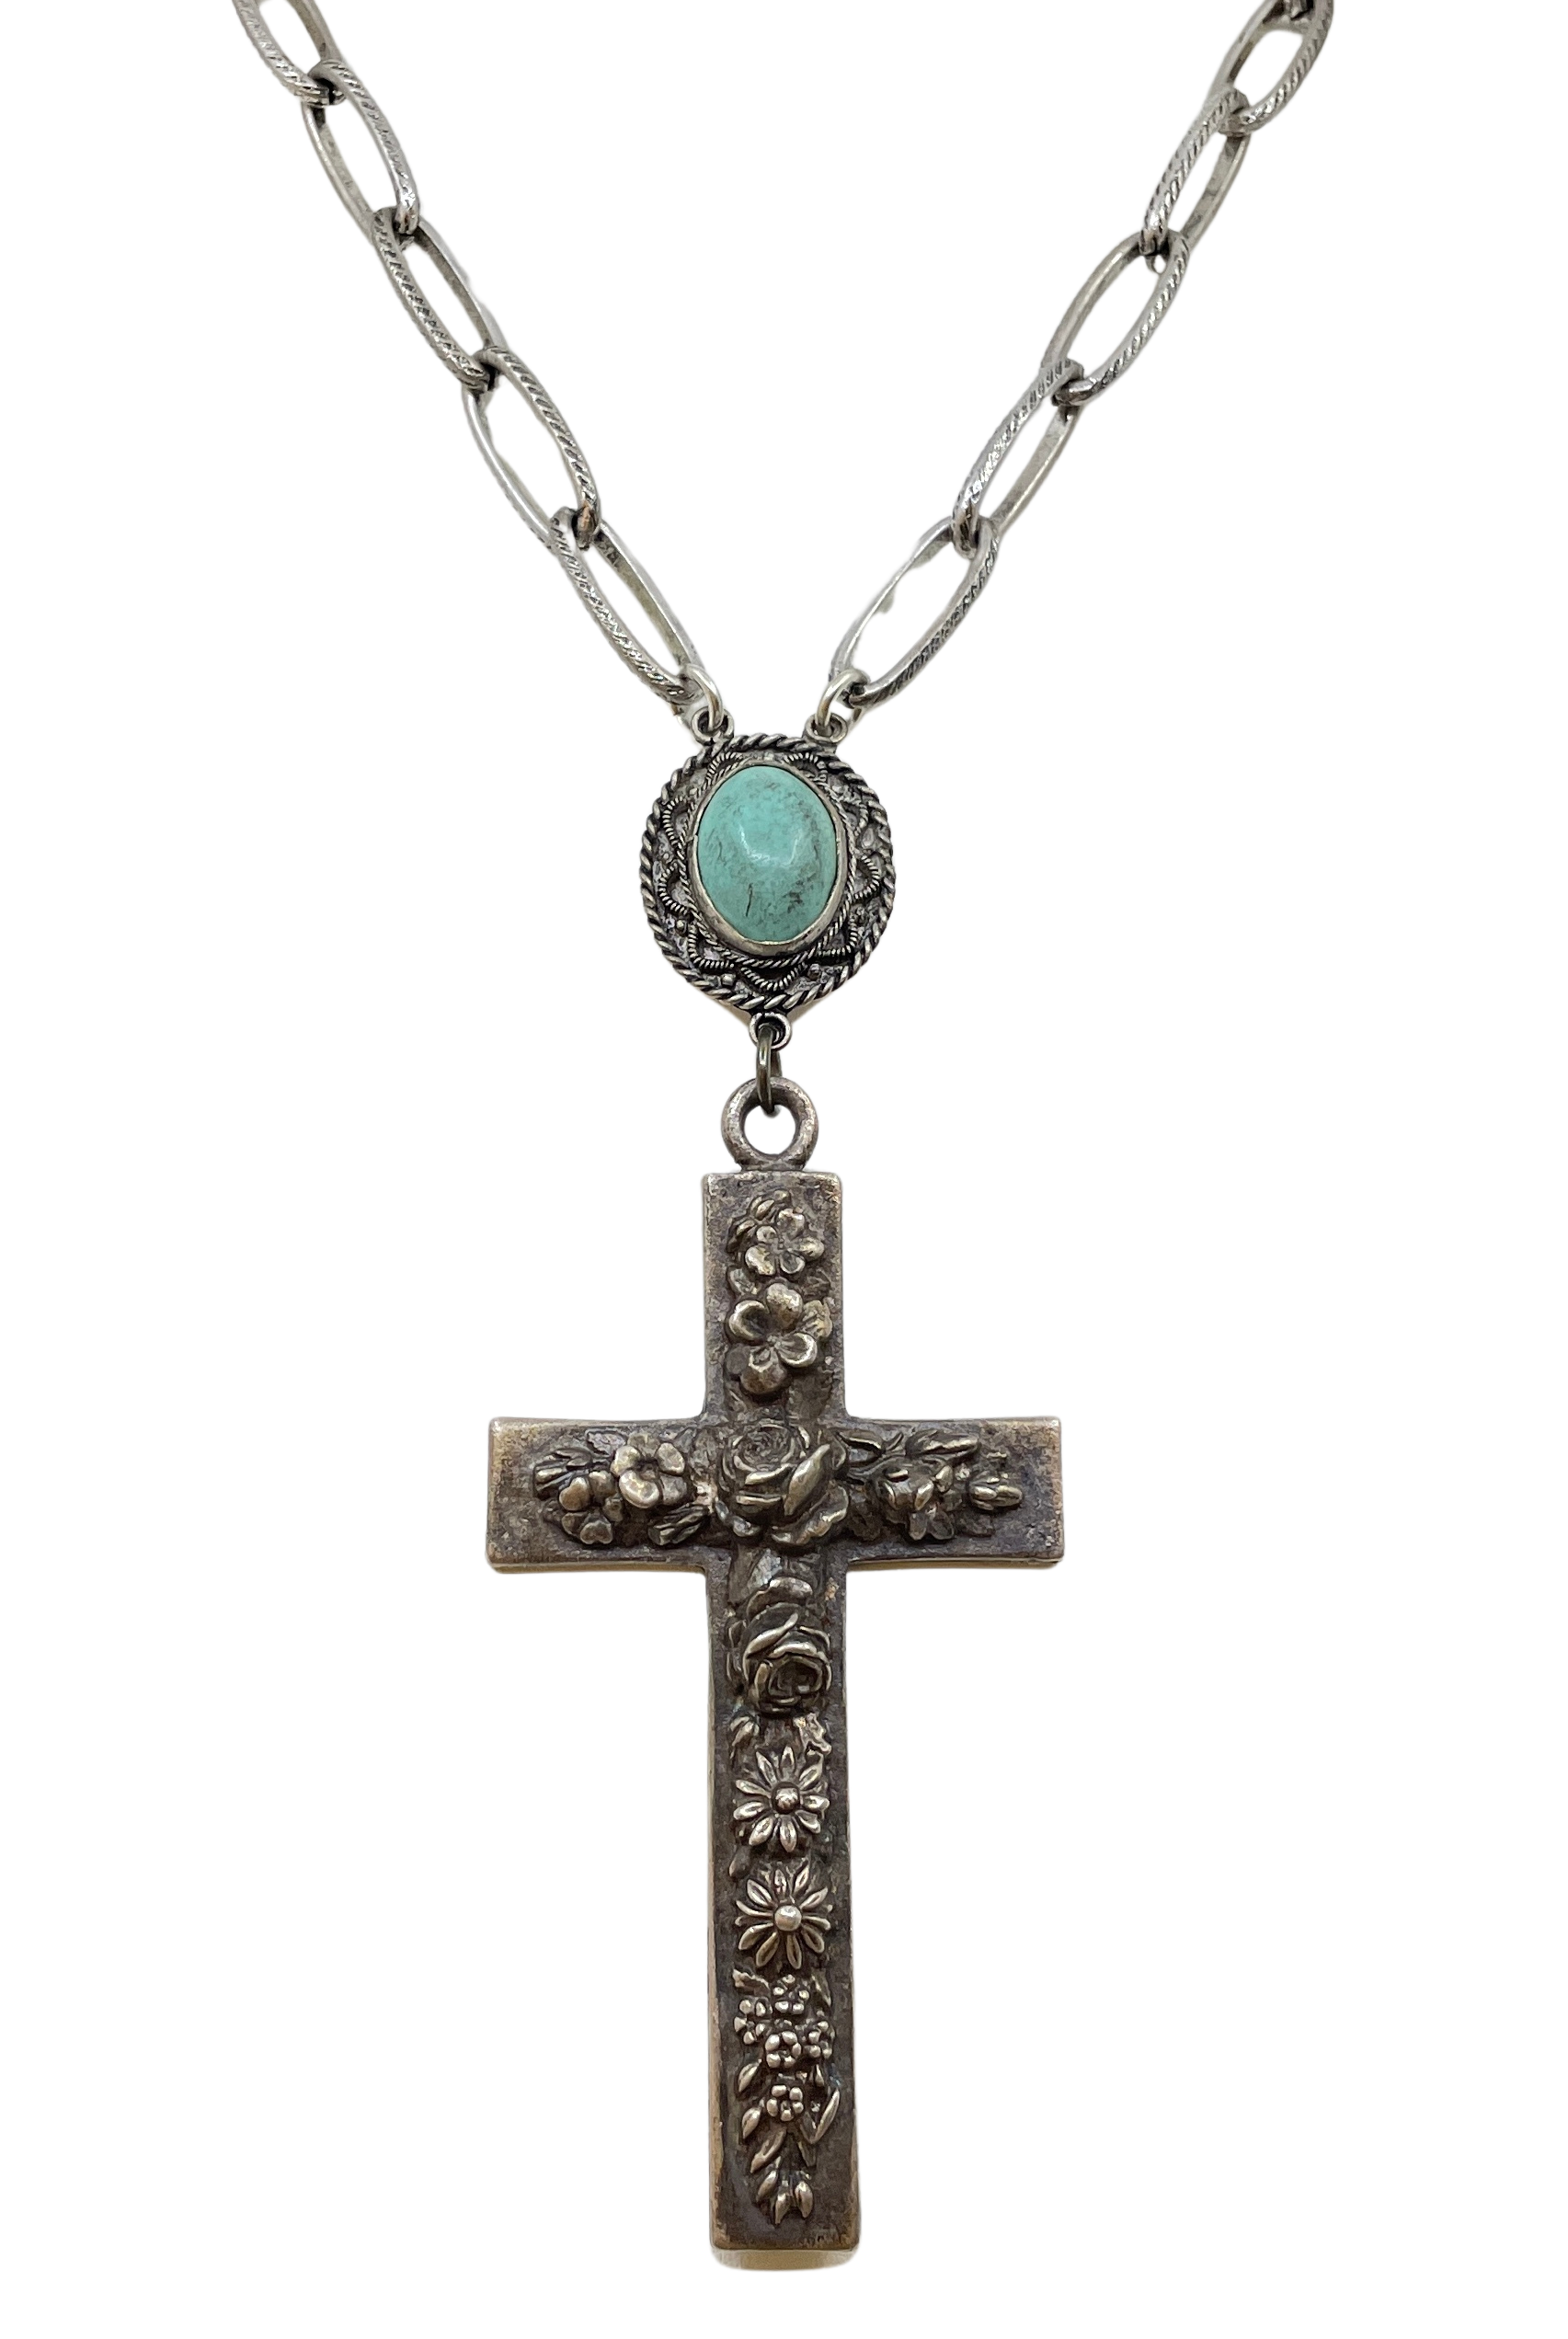 Vintage Turquoise Connector & Ornate Cross Necklace